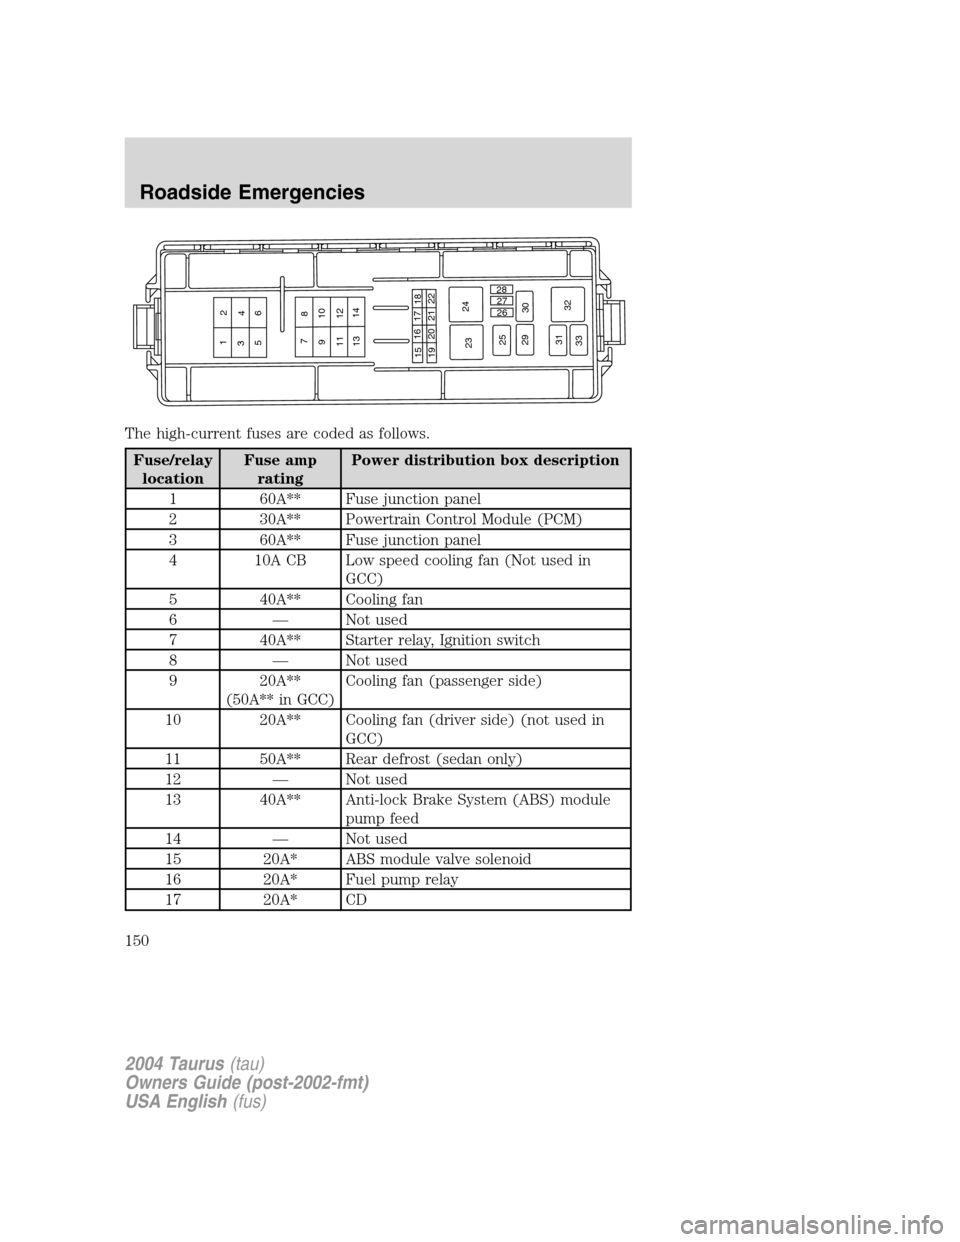 FORD TAURUS 2004 4.G Owners Manual The high-current fuses are coded as follows.
Fuse/relay
locationFuse amp
ratingPower distribution box description
1 60A** Fuse junction panel
2 30A** Powertrain Control Module (PCM)
3 60A** Fuse junct